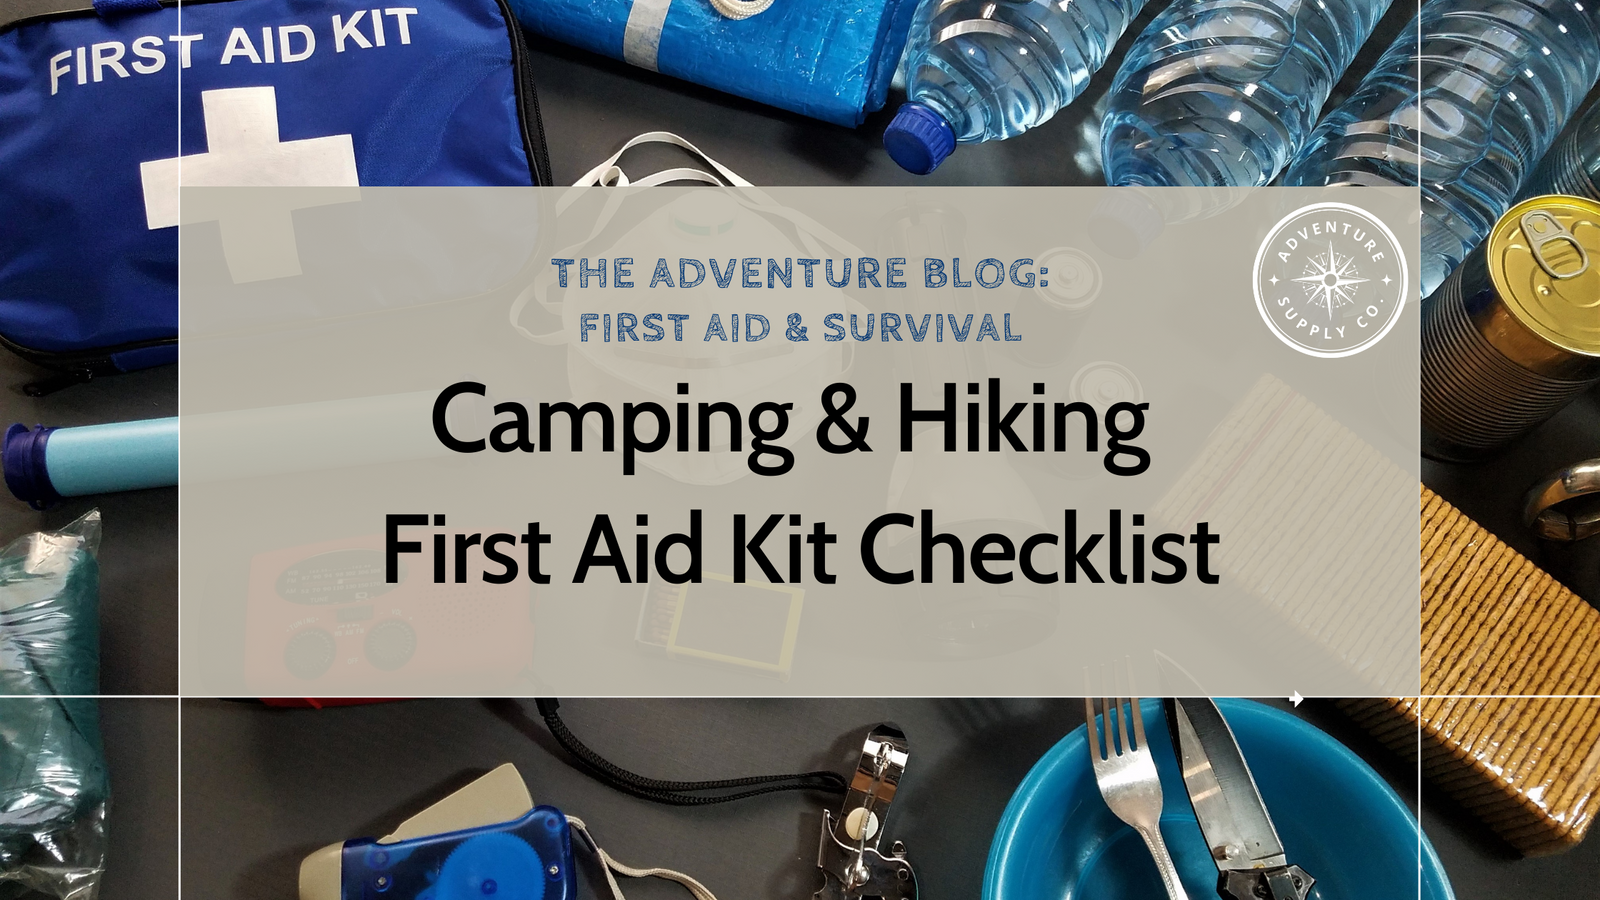 Camping & Hiking First Aid Kit Checklist